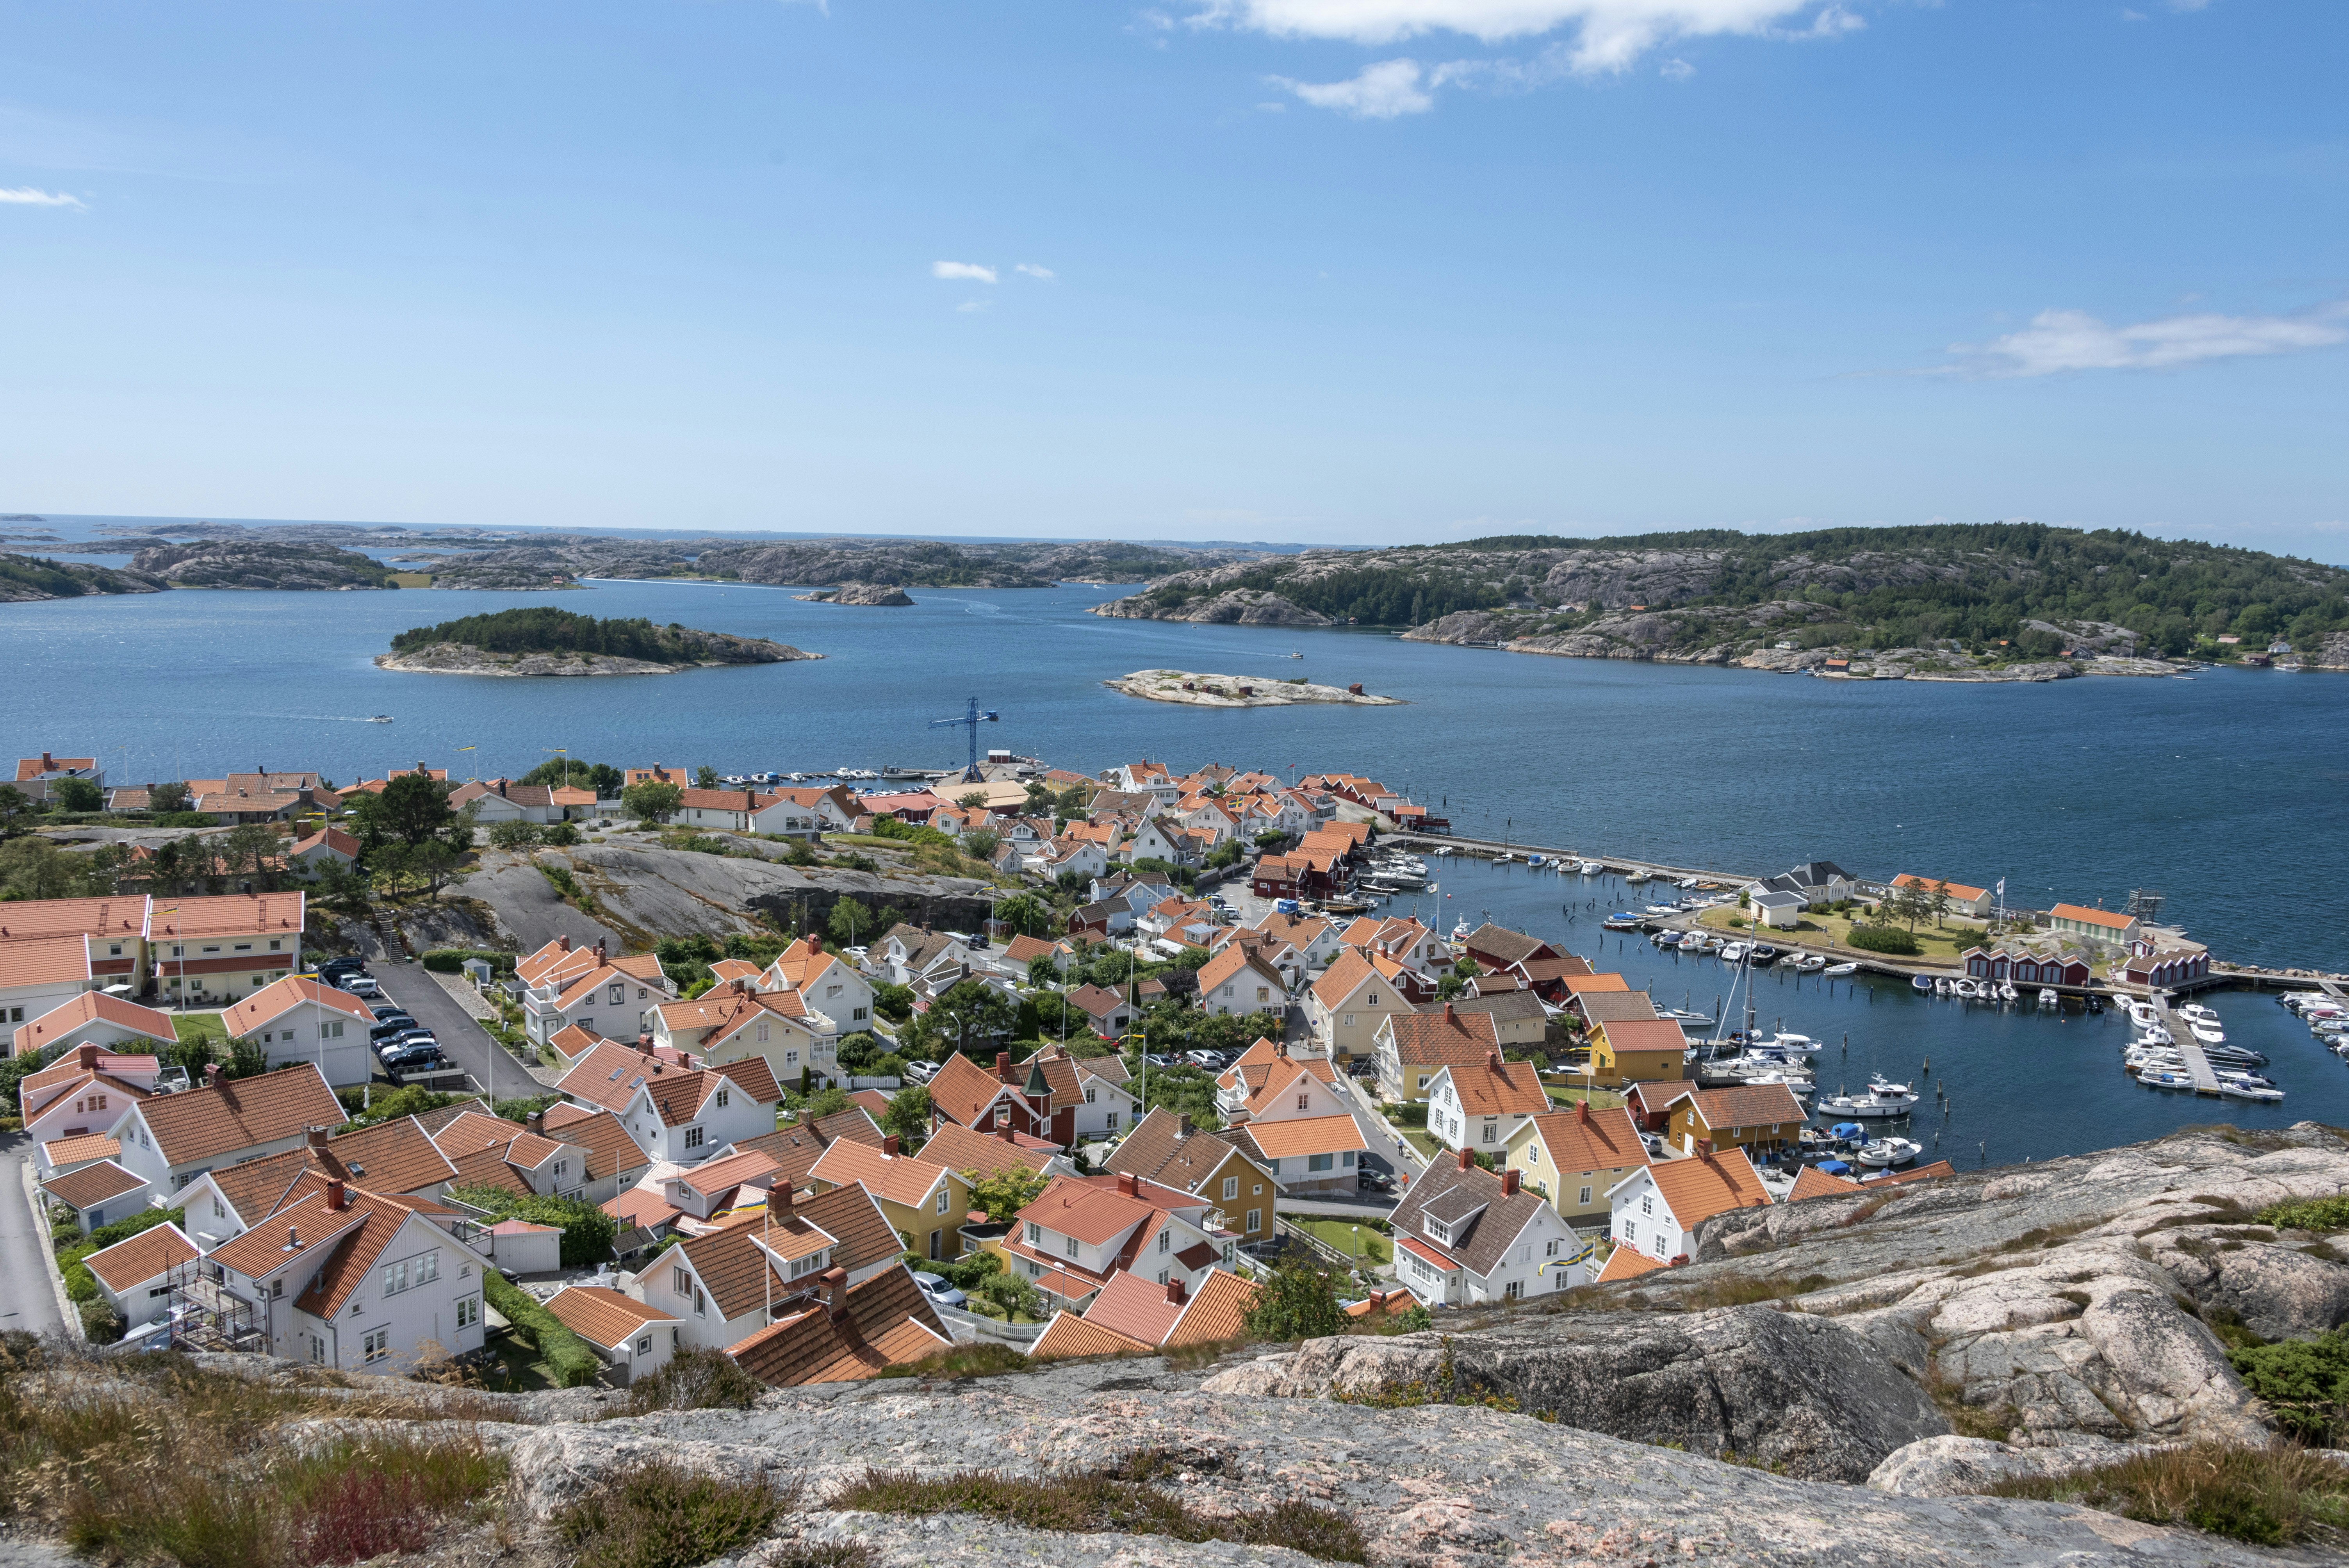 Fjällbacka, Sweden, a more relaxed stag or hen experience. The coast is visible, and a cluster of houses painted white with red roofs are in front.